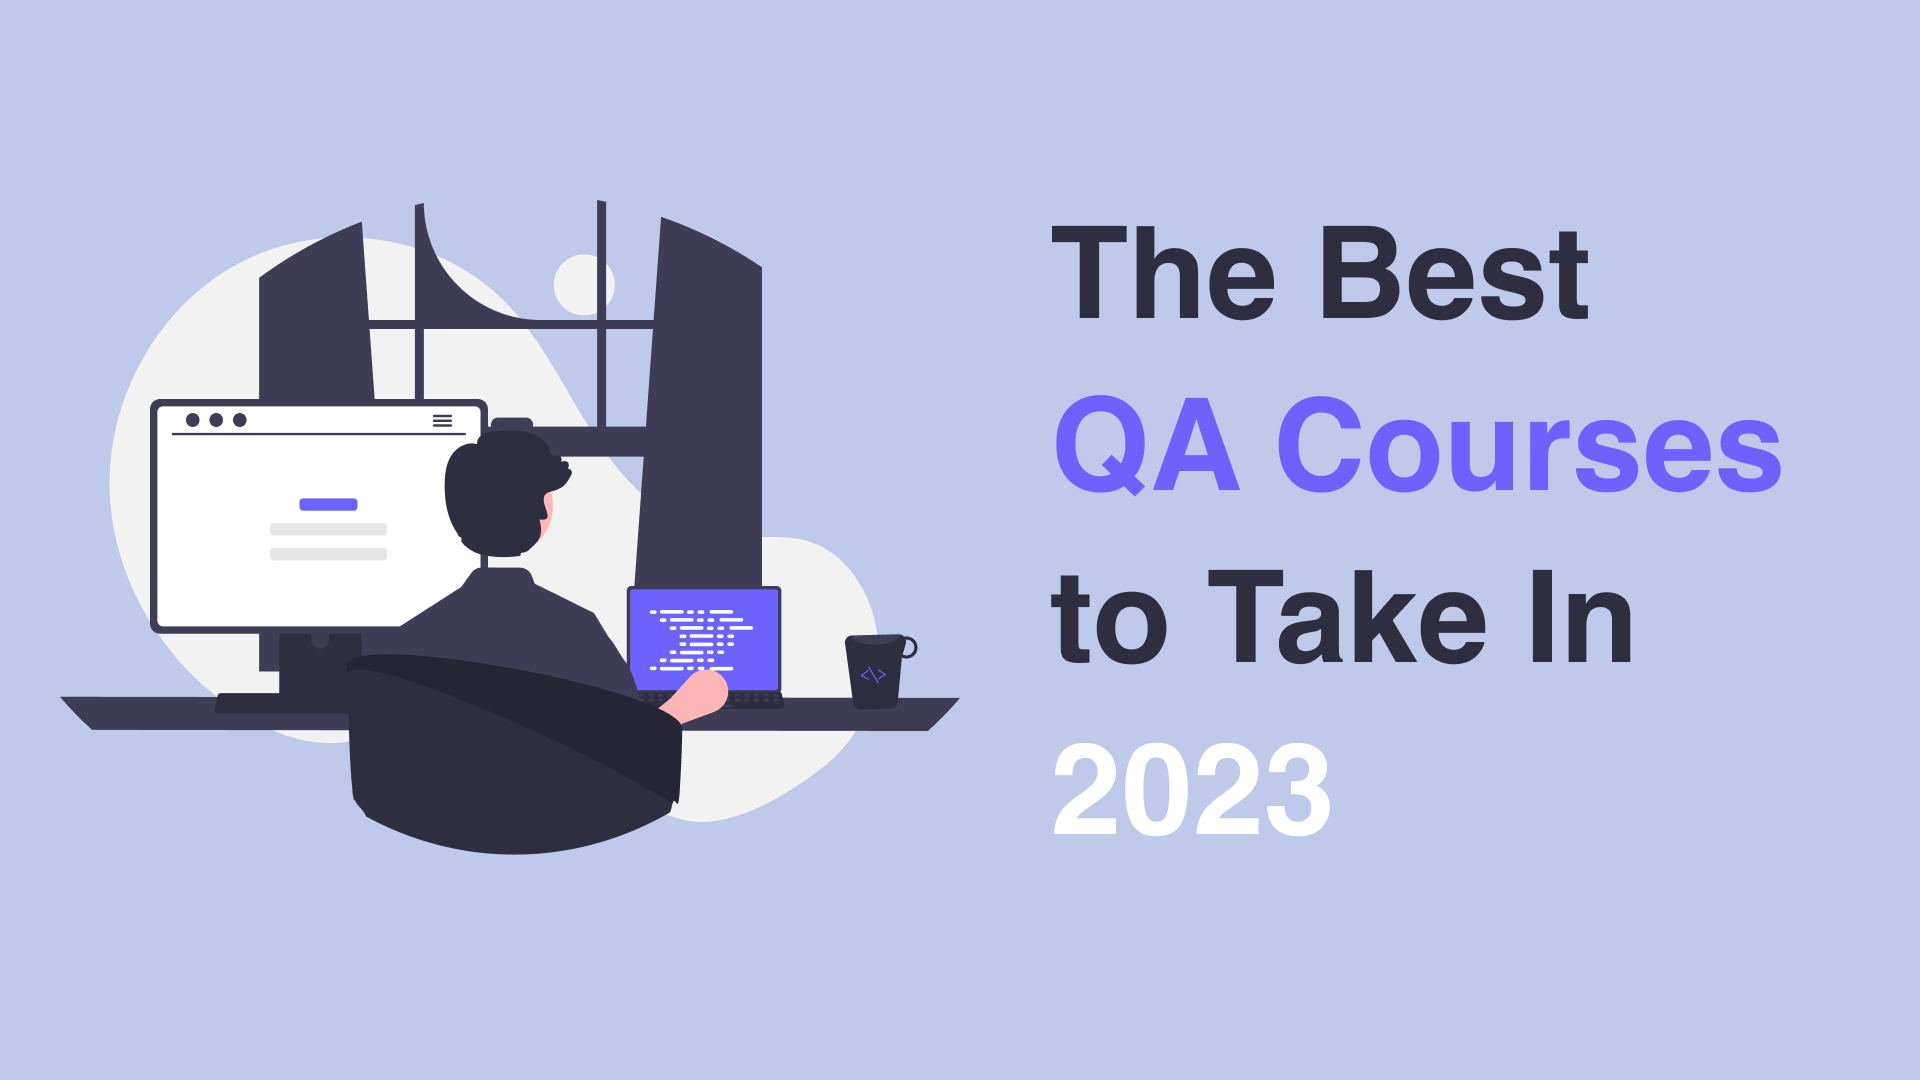 The Best QA Courses to Take In 2023